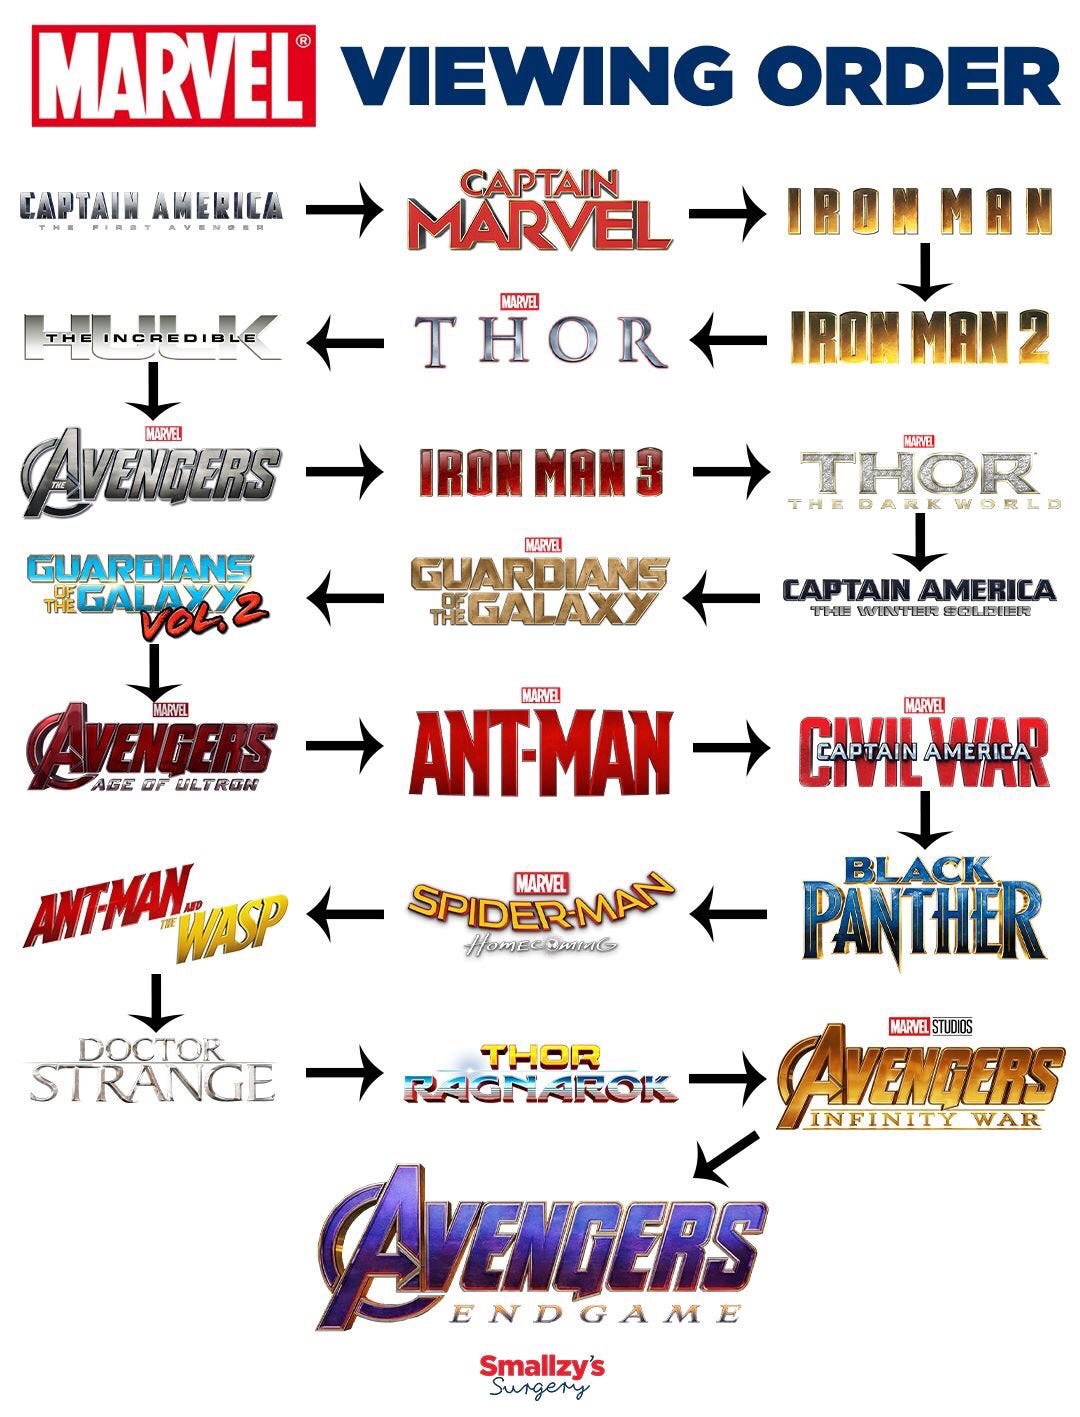 The chronological viewing order. : marvelstudios